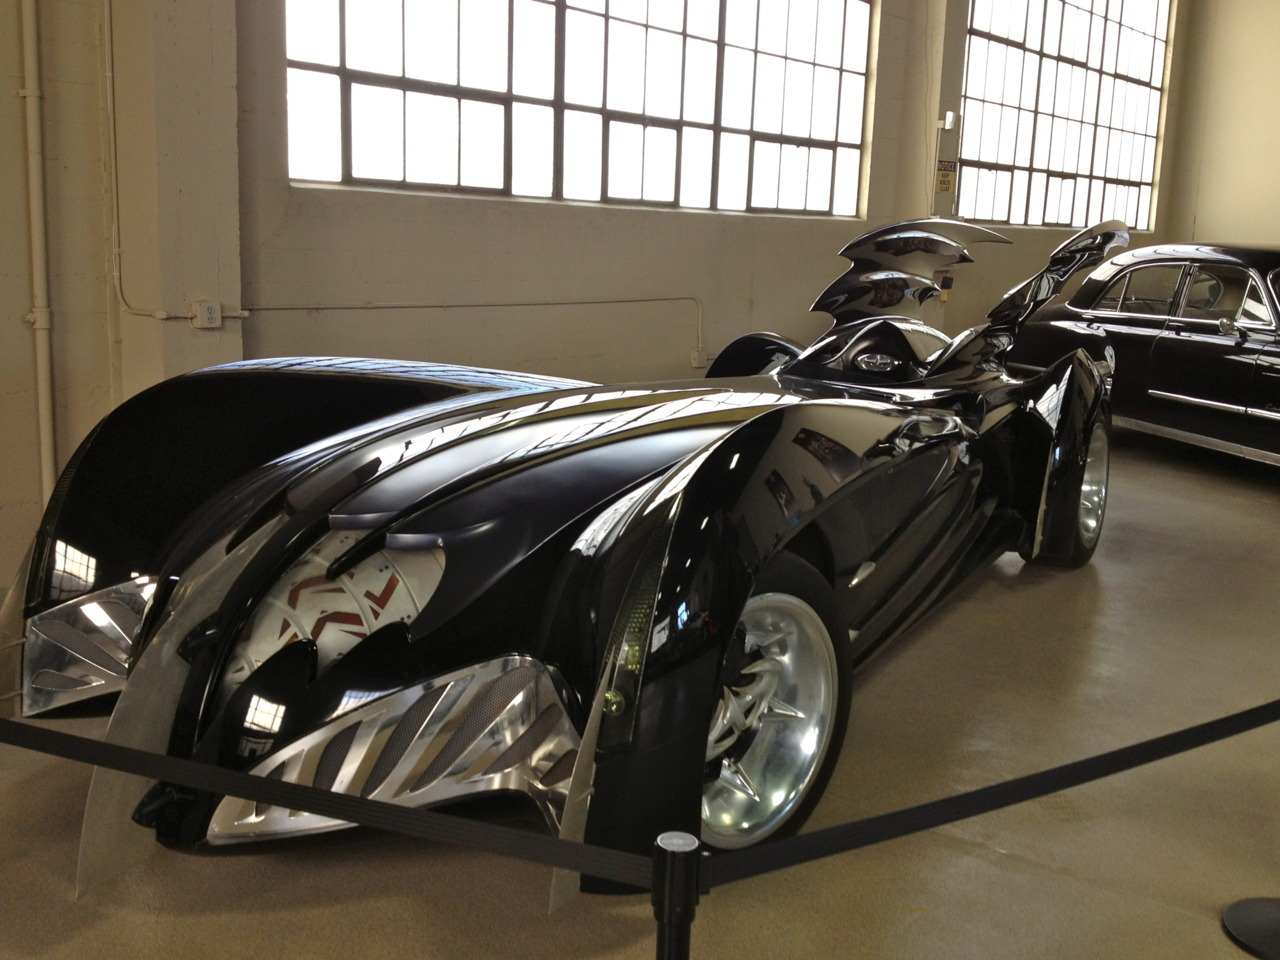 stephsutton:  Highlights from the Warner Bros. Car Museum The studio tour, which